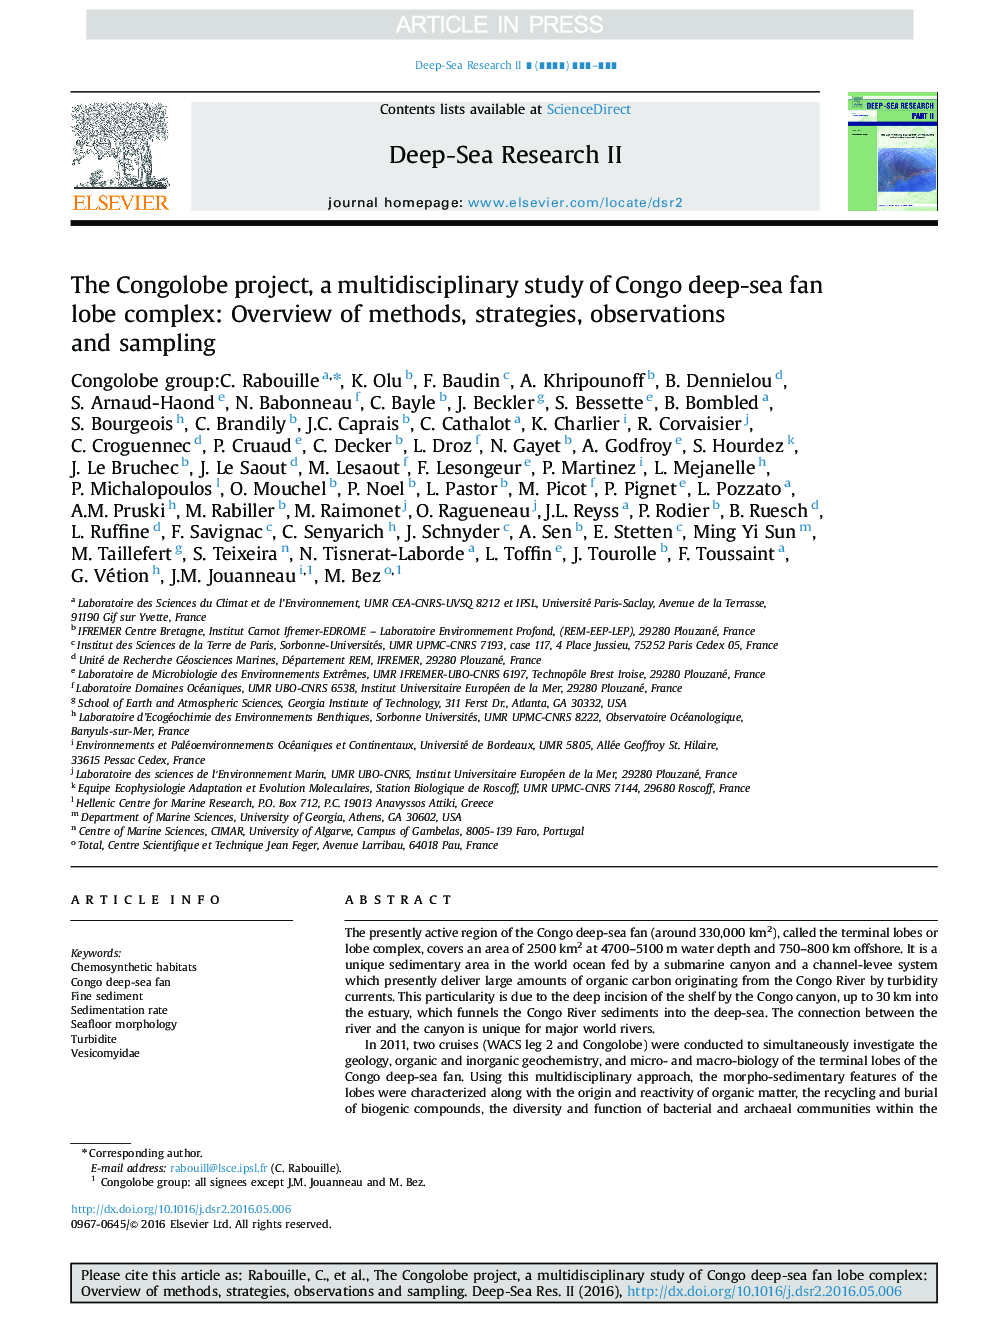 The Congolobe project, a multidisciplinary study of Congo deep-sea fan lobe complex: Overview of methods, strategies, observations and sampling